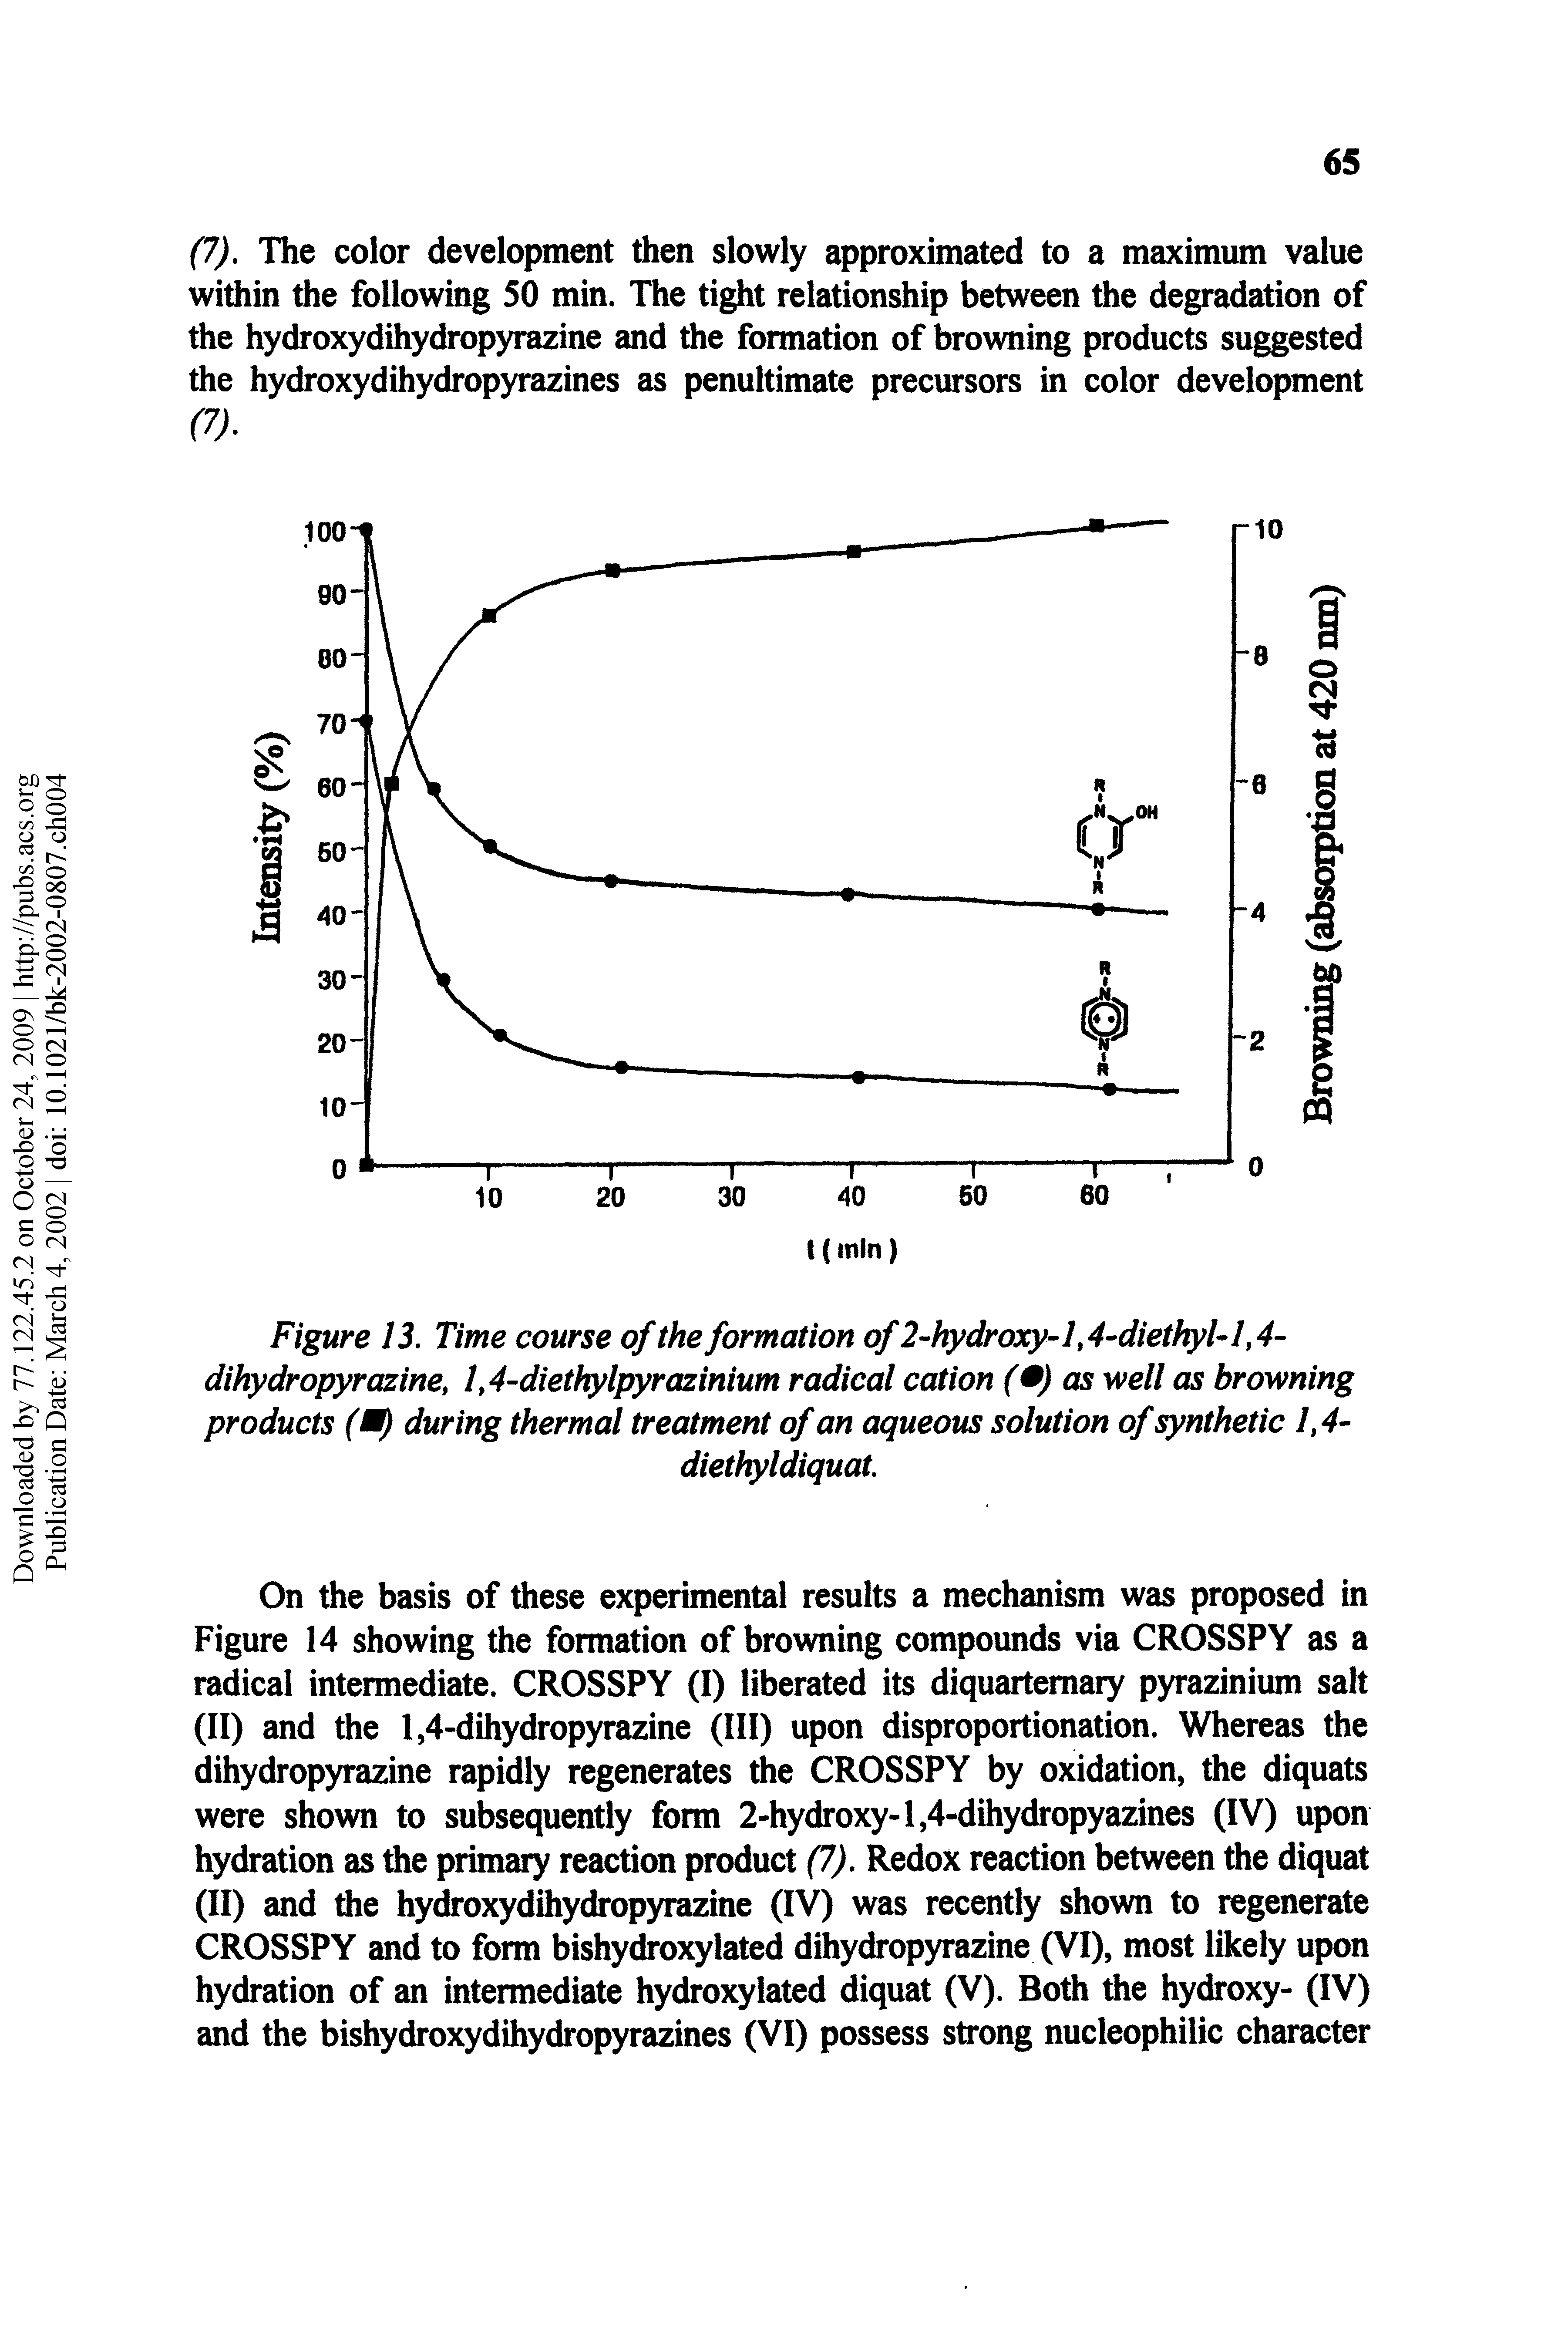 Figure 13. Time course of the formation of2-hydroxy-l,4-dietl l-I,4-dihydropyrazine, 1,4-diethylpyrazinium radical cation ( ) as well as browning products during thermal treatment of an aqueous solution of synthetic 1,4-...